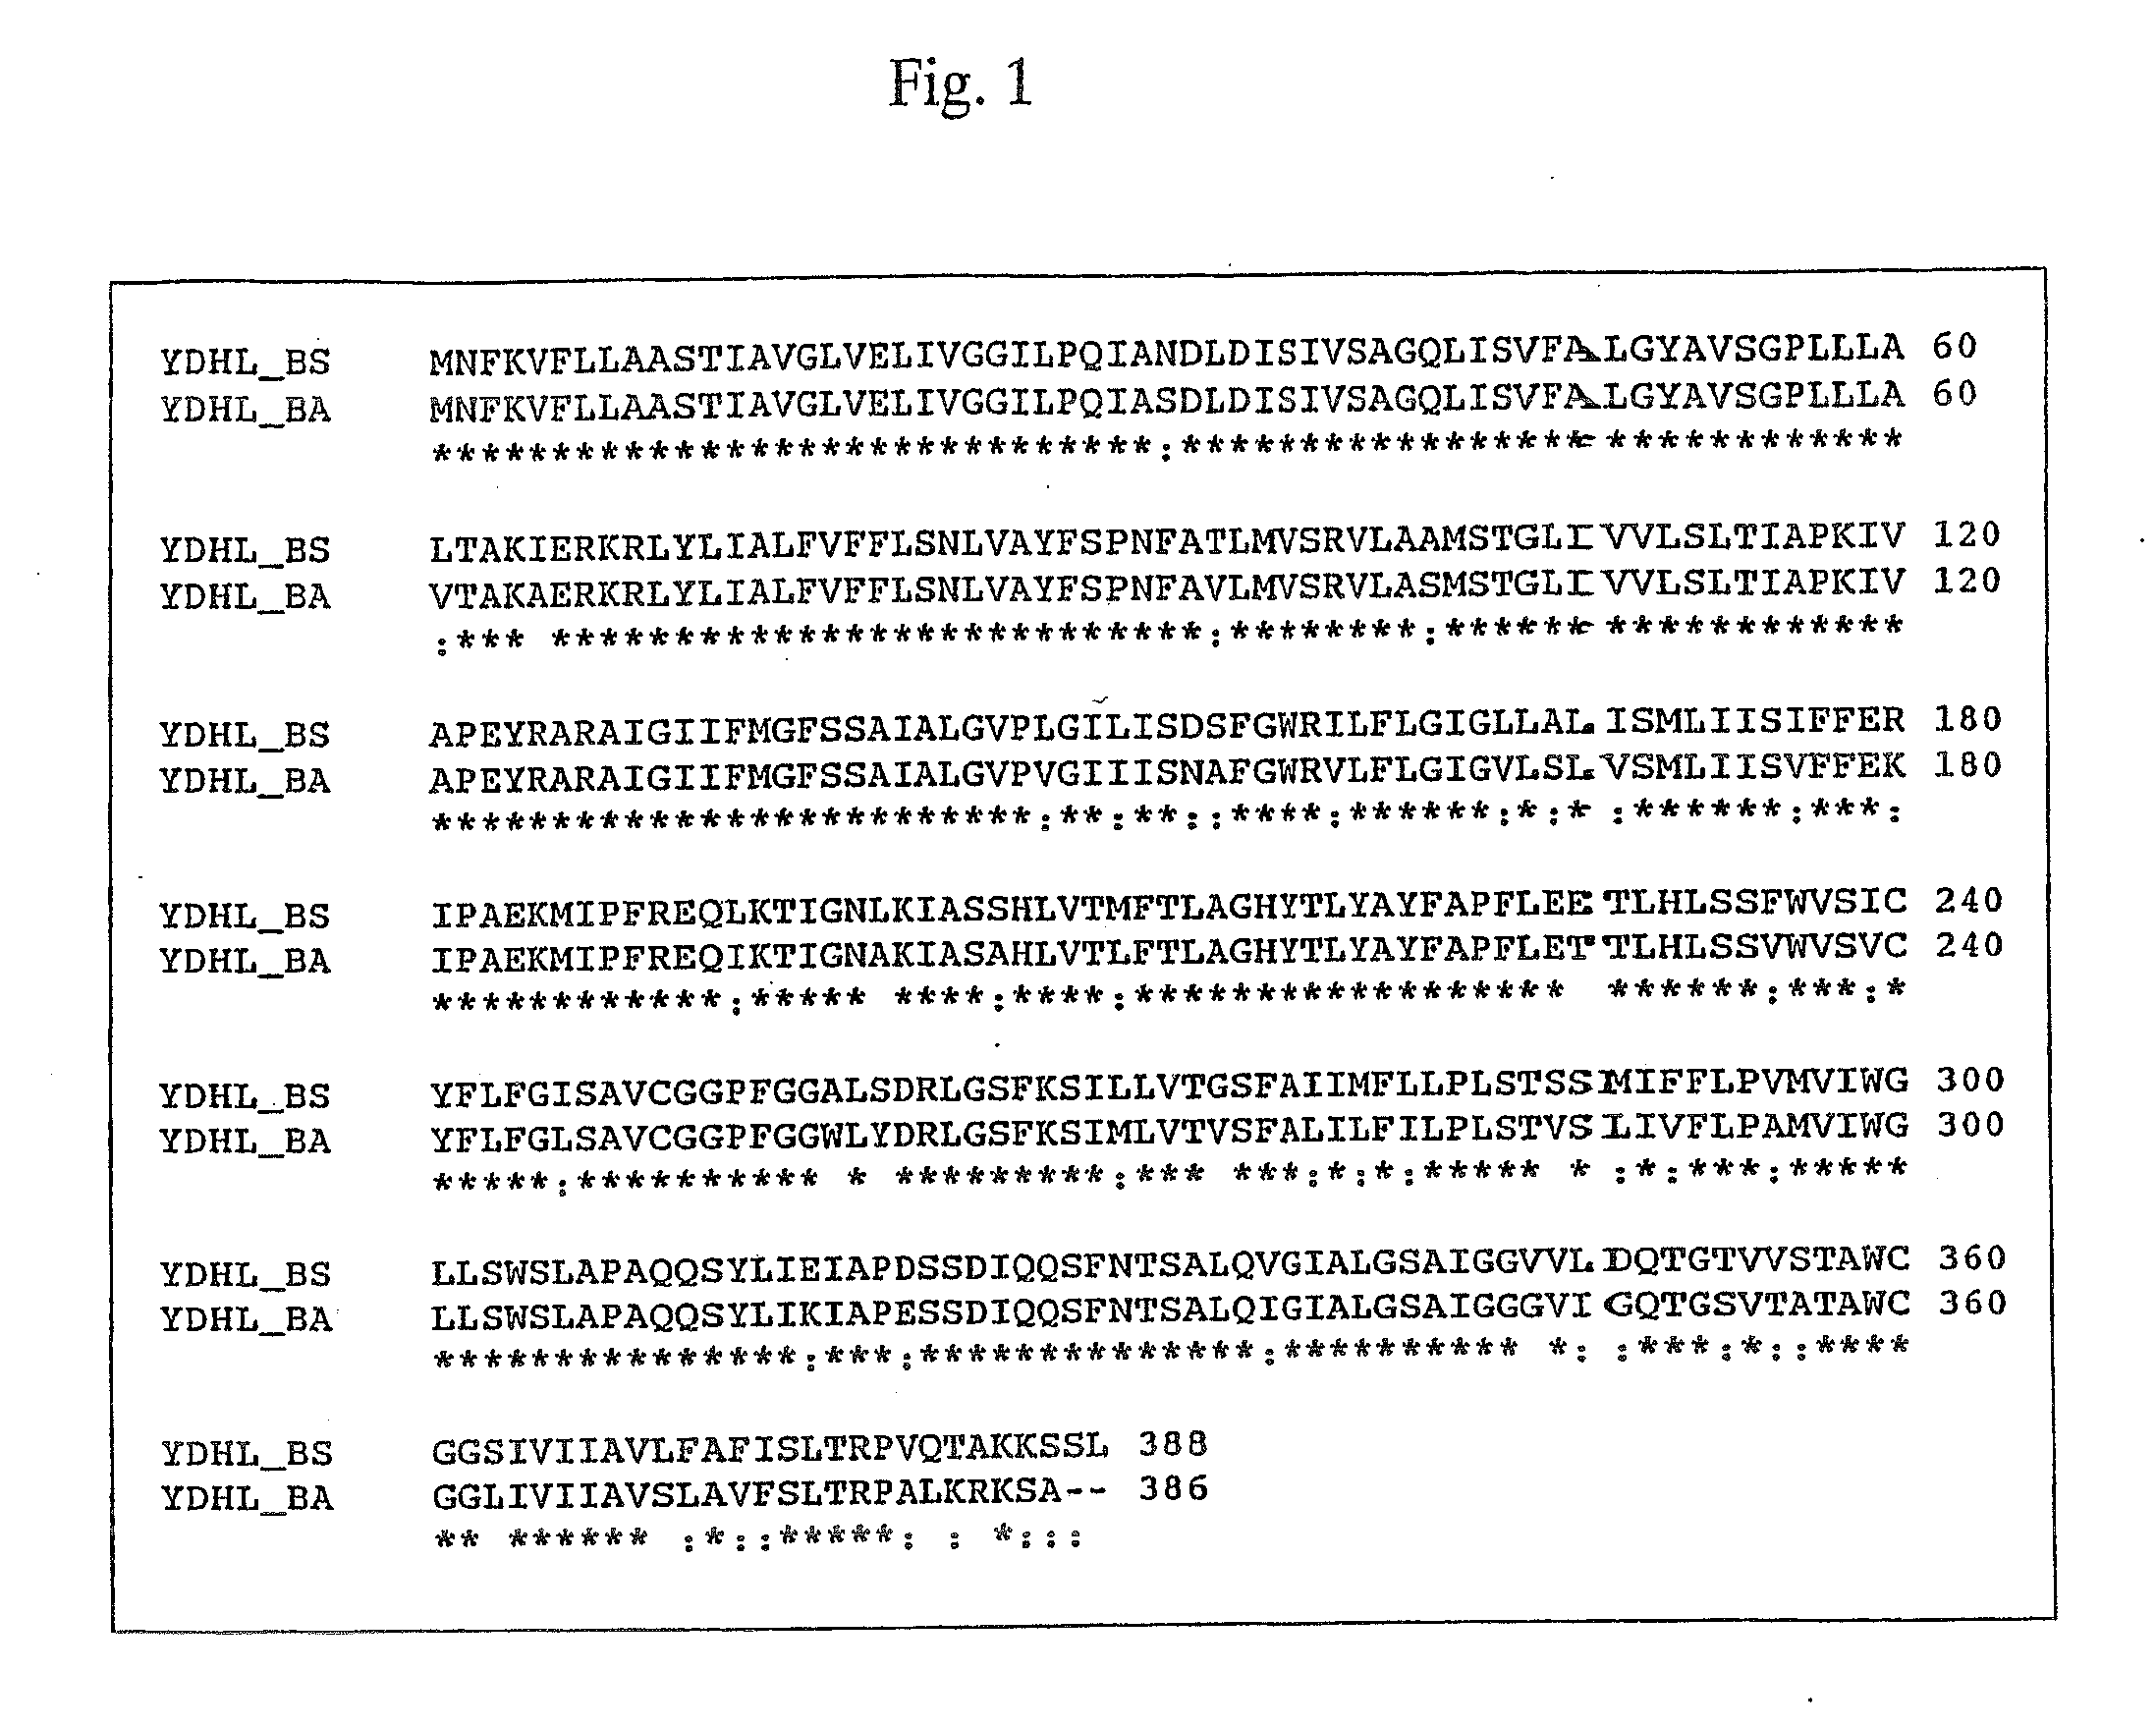 Method for Producing Purine Nucleosides and Nucleotides by Fermentation Using Bacterium Belonging to the Genus Bacillus or Escherichia